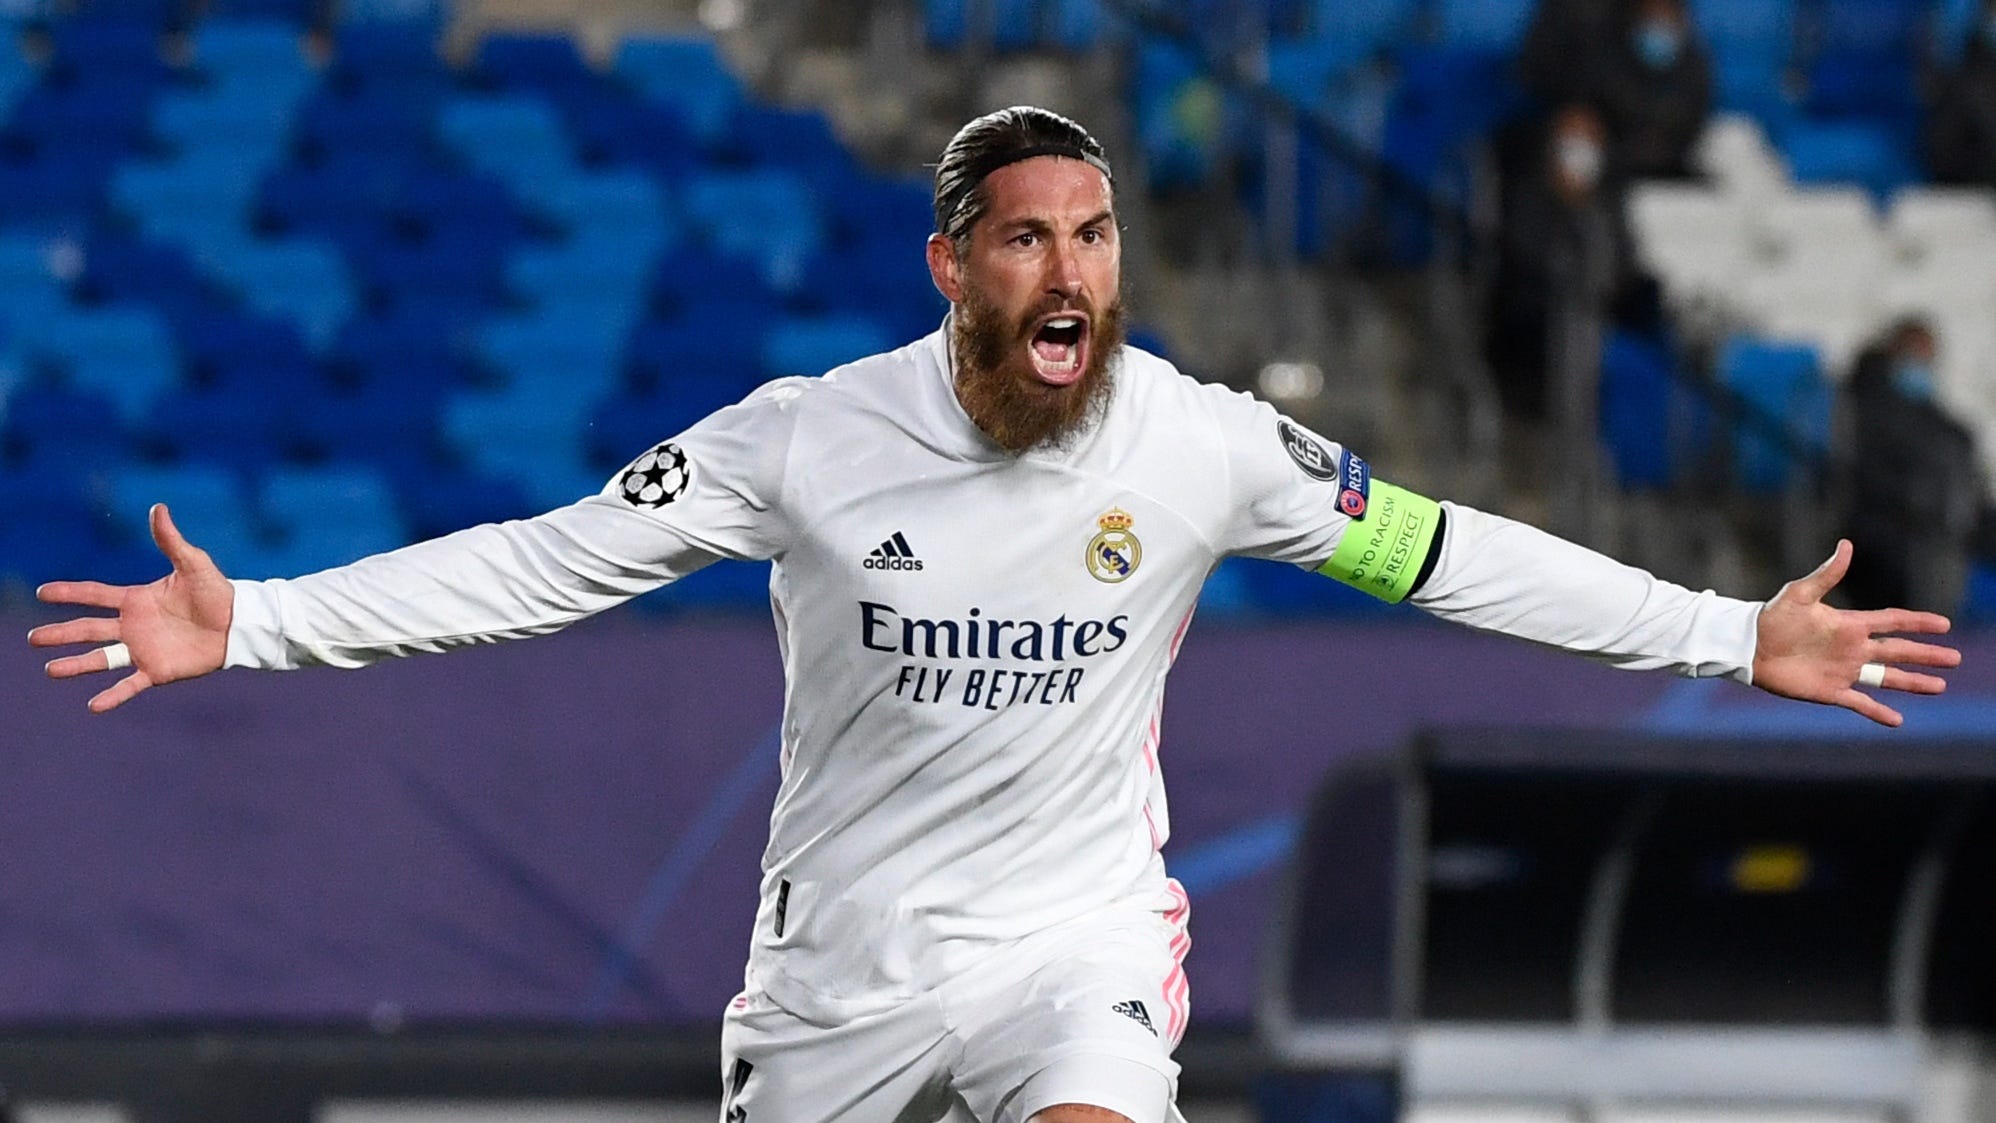 End of an era' - Legend Sergio Ramos' five greatest moments at Real Madrid